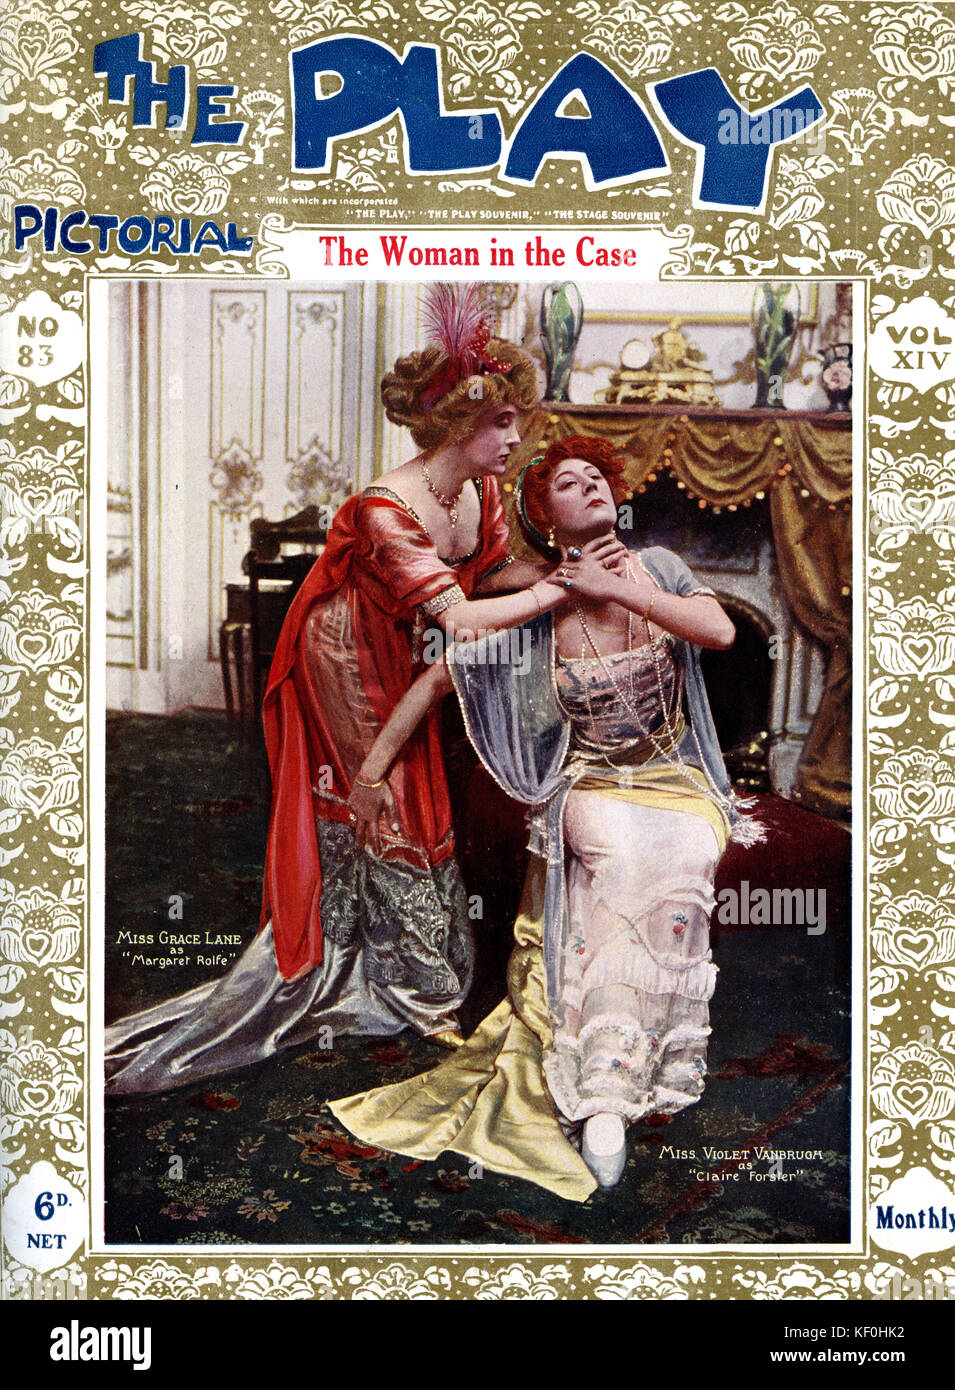 'The Woman in the Case' by Clyde Fitch, with Grace Lane as Margaret Rolfe (1876 - 1956) and Violet Vanbrugh as Claire Foster almost strangling Claire Forster in the final denoument (11 June 1867 - 10 November 1942), at the Garrick Theatre, London, 1909. Cover of Play Pictorial, 1909. Stock Photo